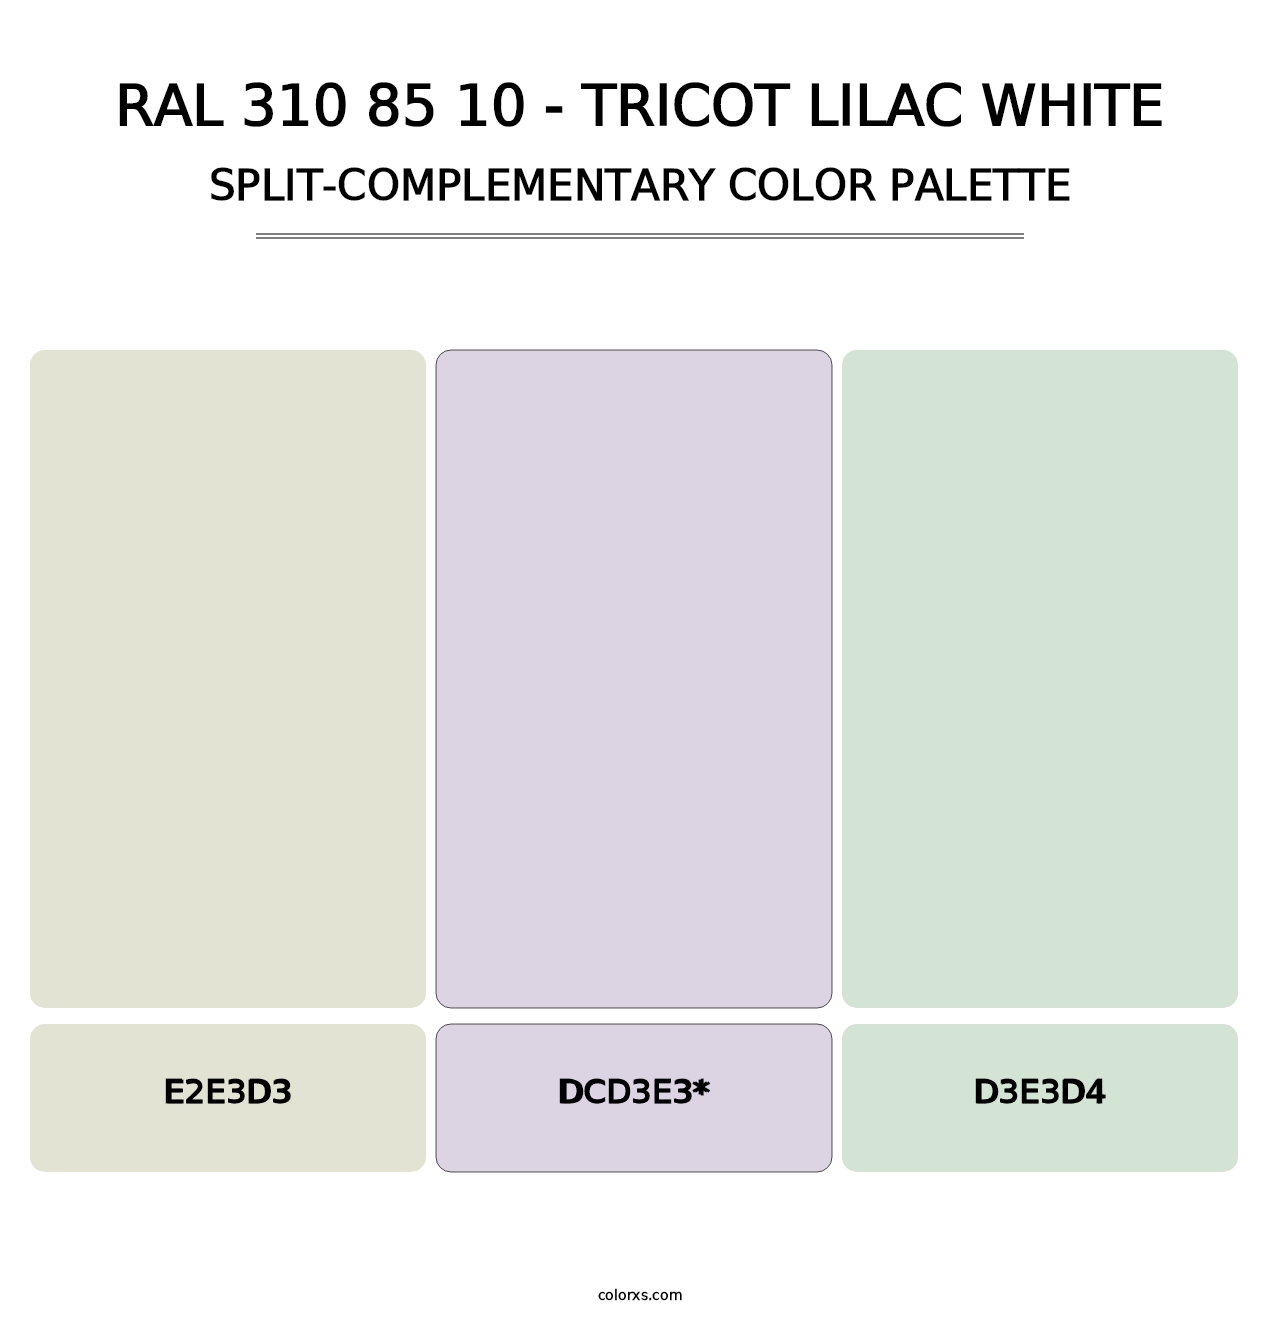 RAL 310 85 10 - Tricot Lilac White - Split-Complementary Color Palette